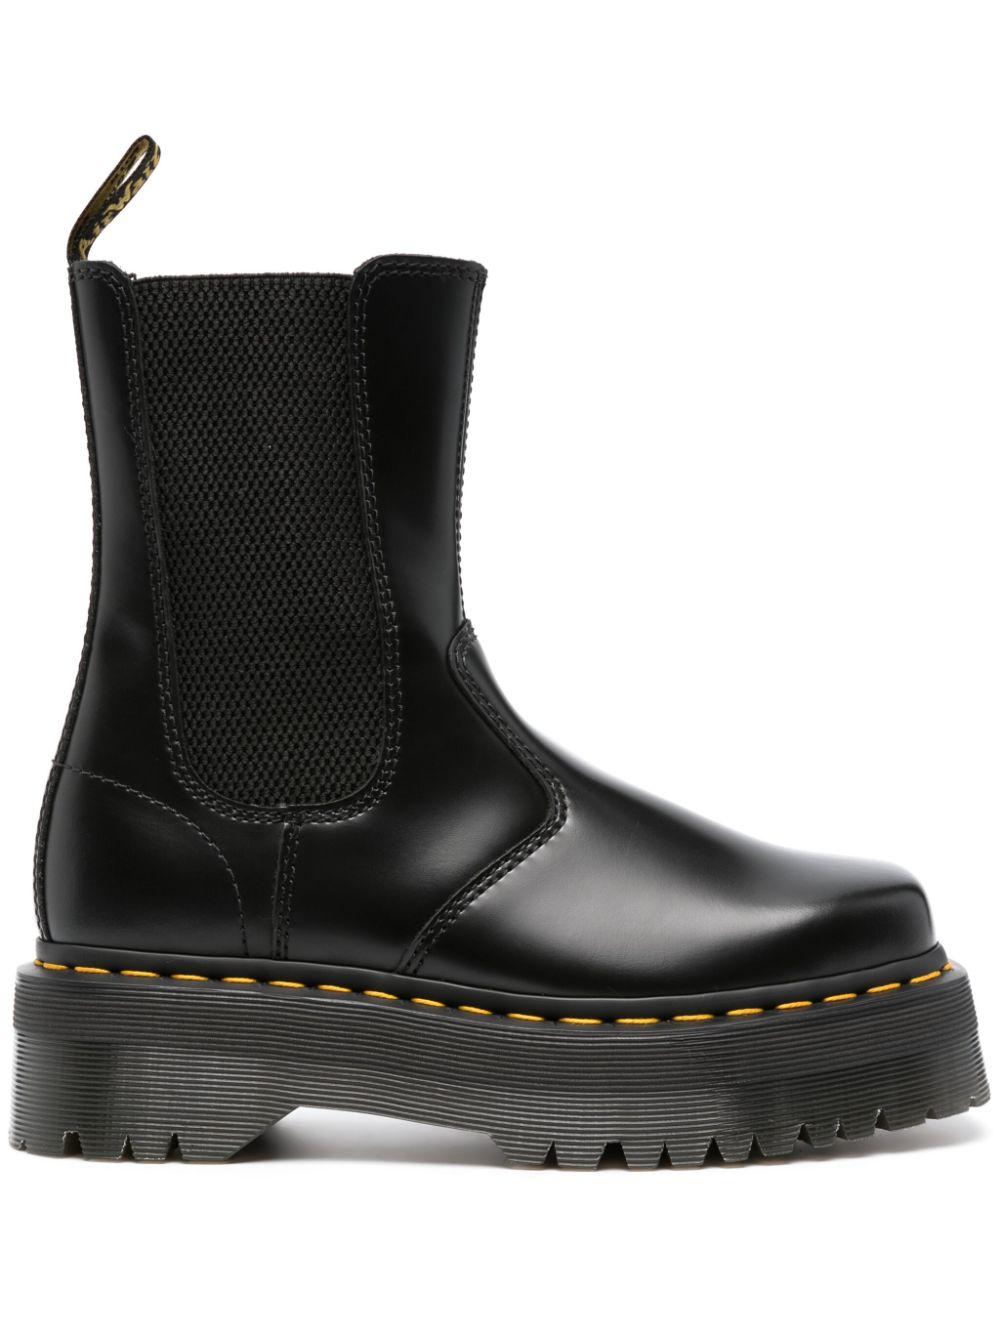 Dr. Martens 2976 Hi Quad Squared Leather Chelsea Boots in Black | Lyst